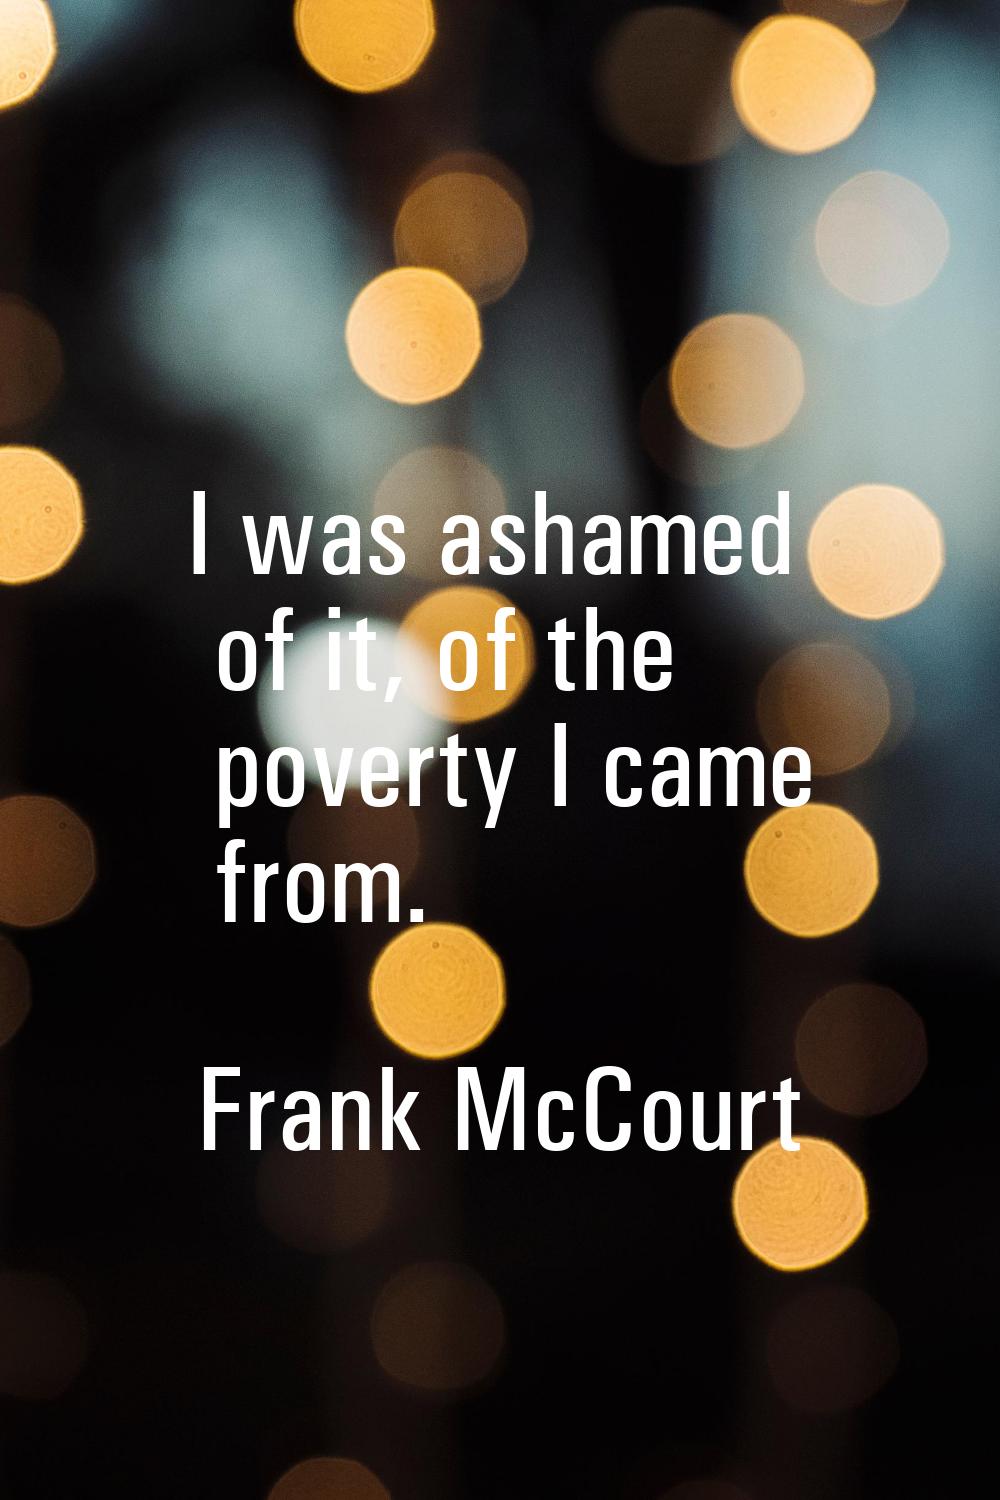 I was ashamed of it, of the poverty I came from.